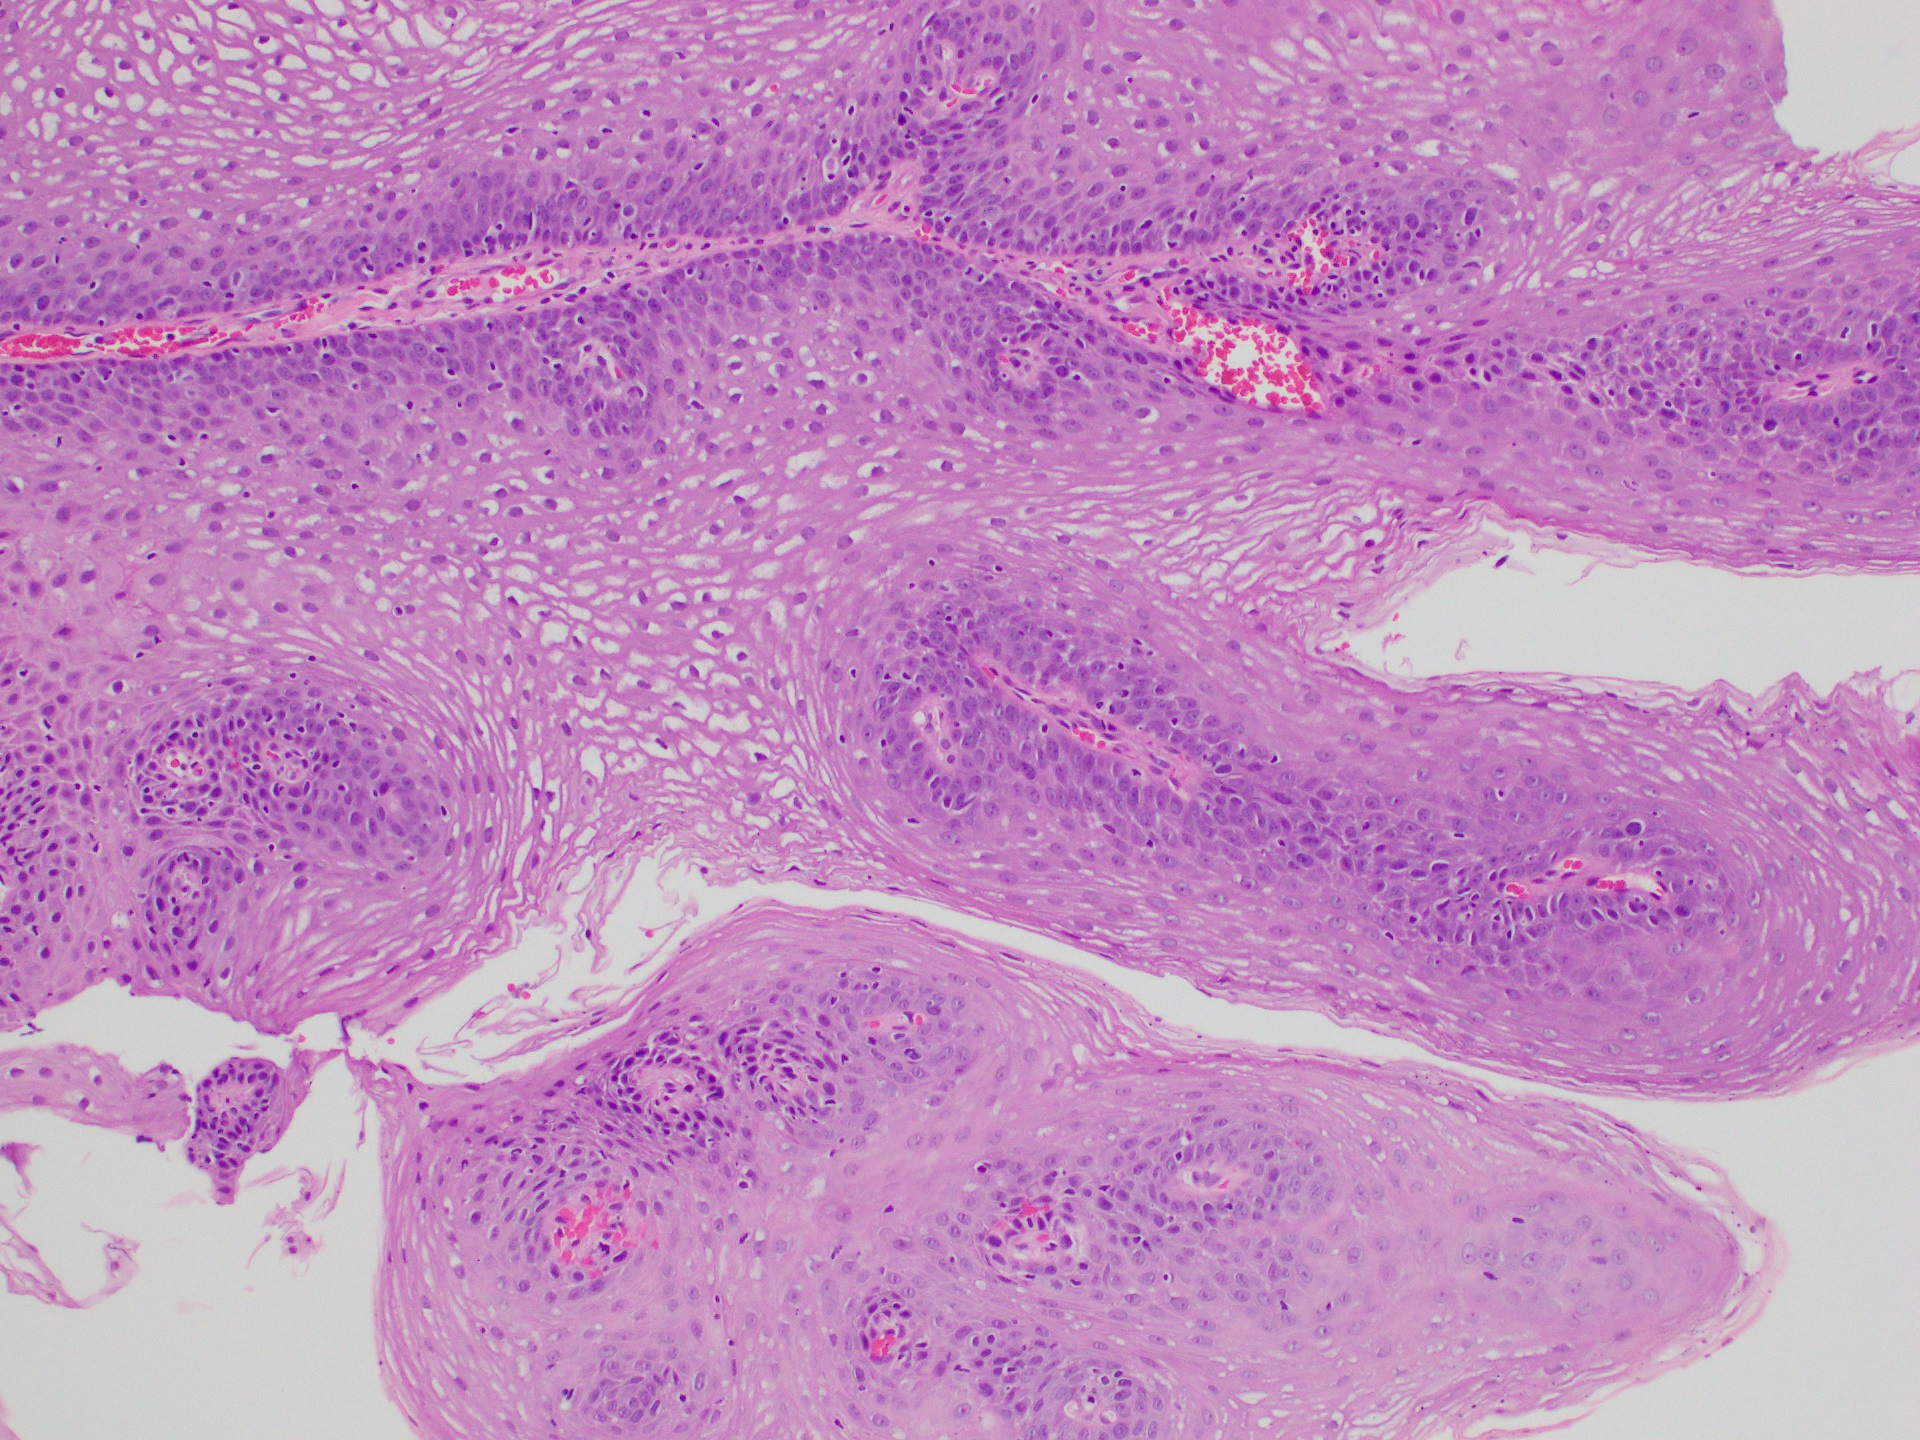 Squamous papilloma in esophagus